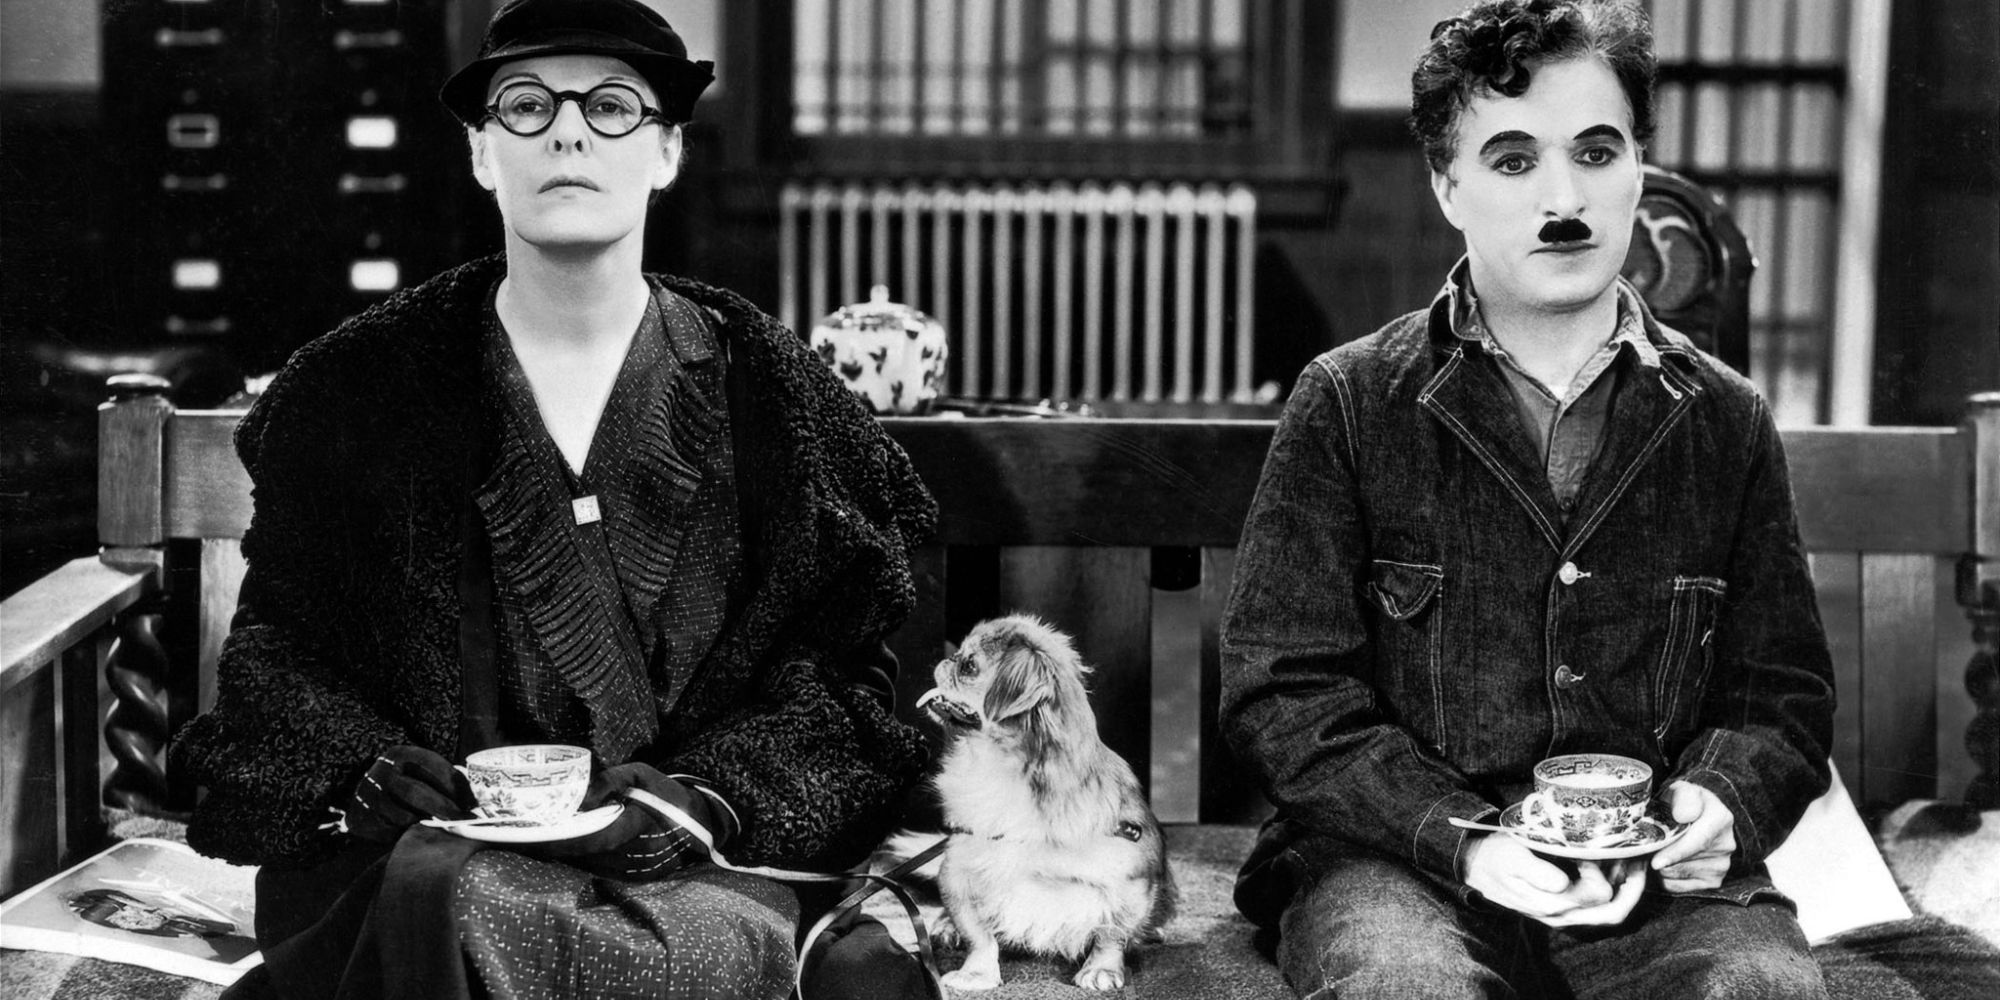 Charlie Chaplin as the Little Tramp sitting next to a woman in 'Modern Times'